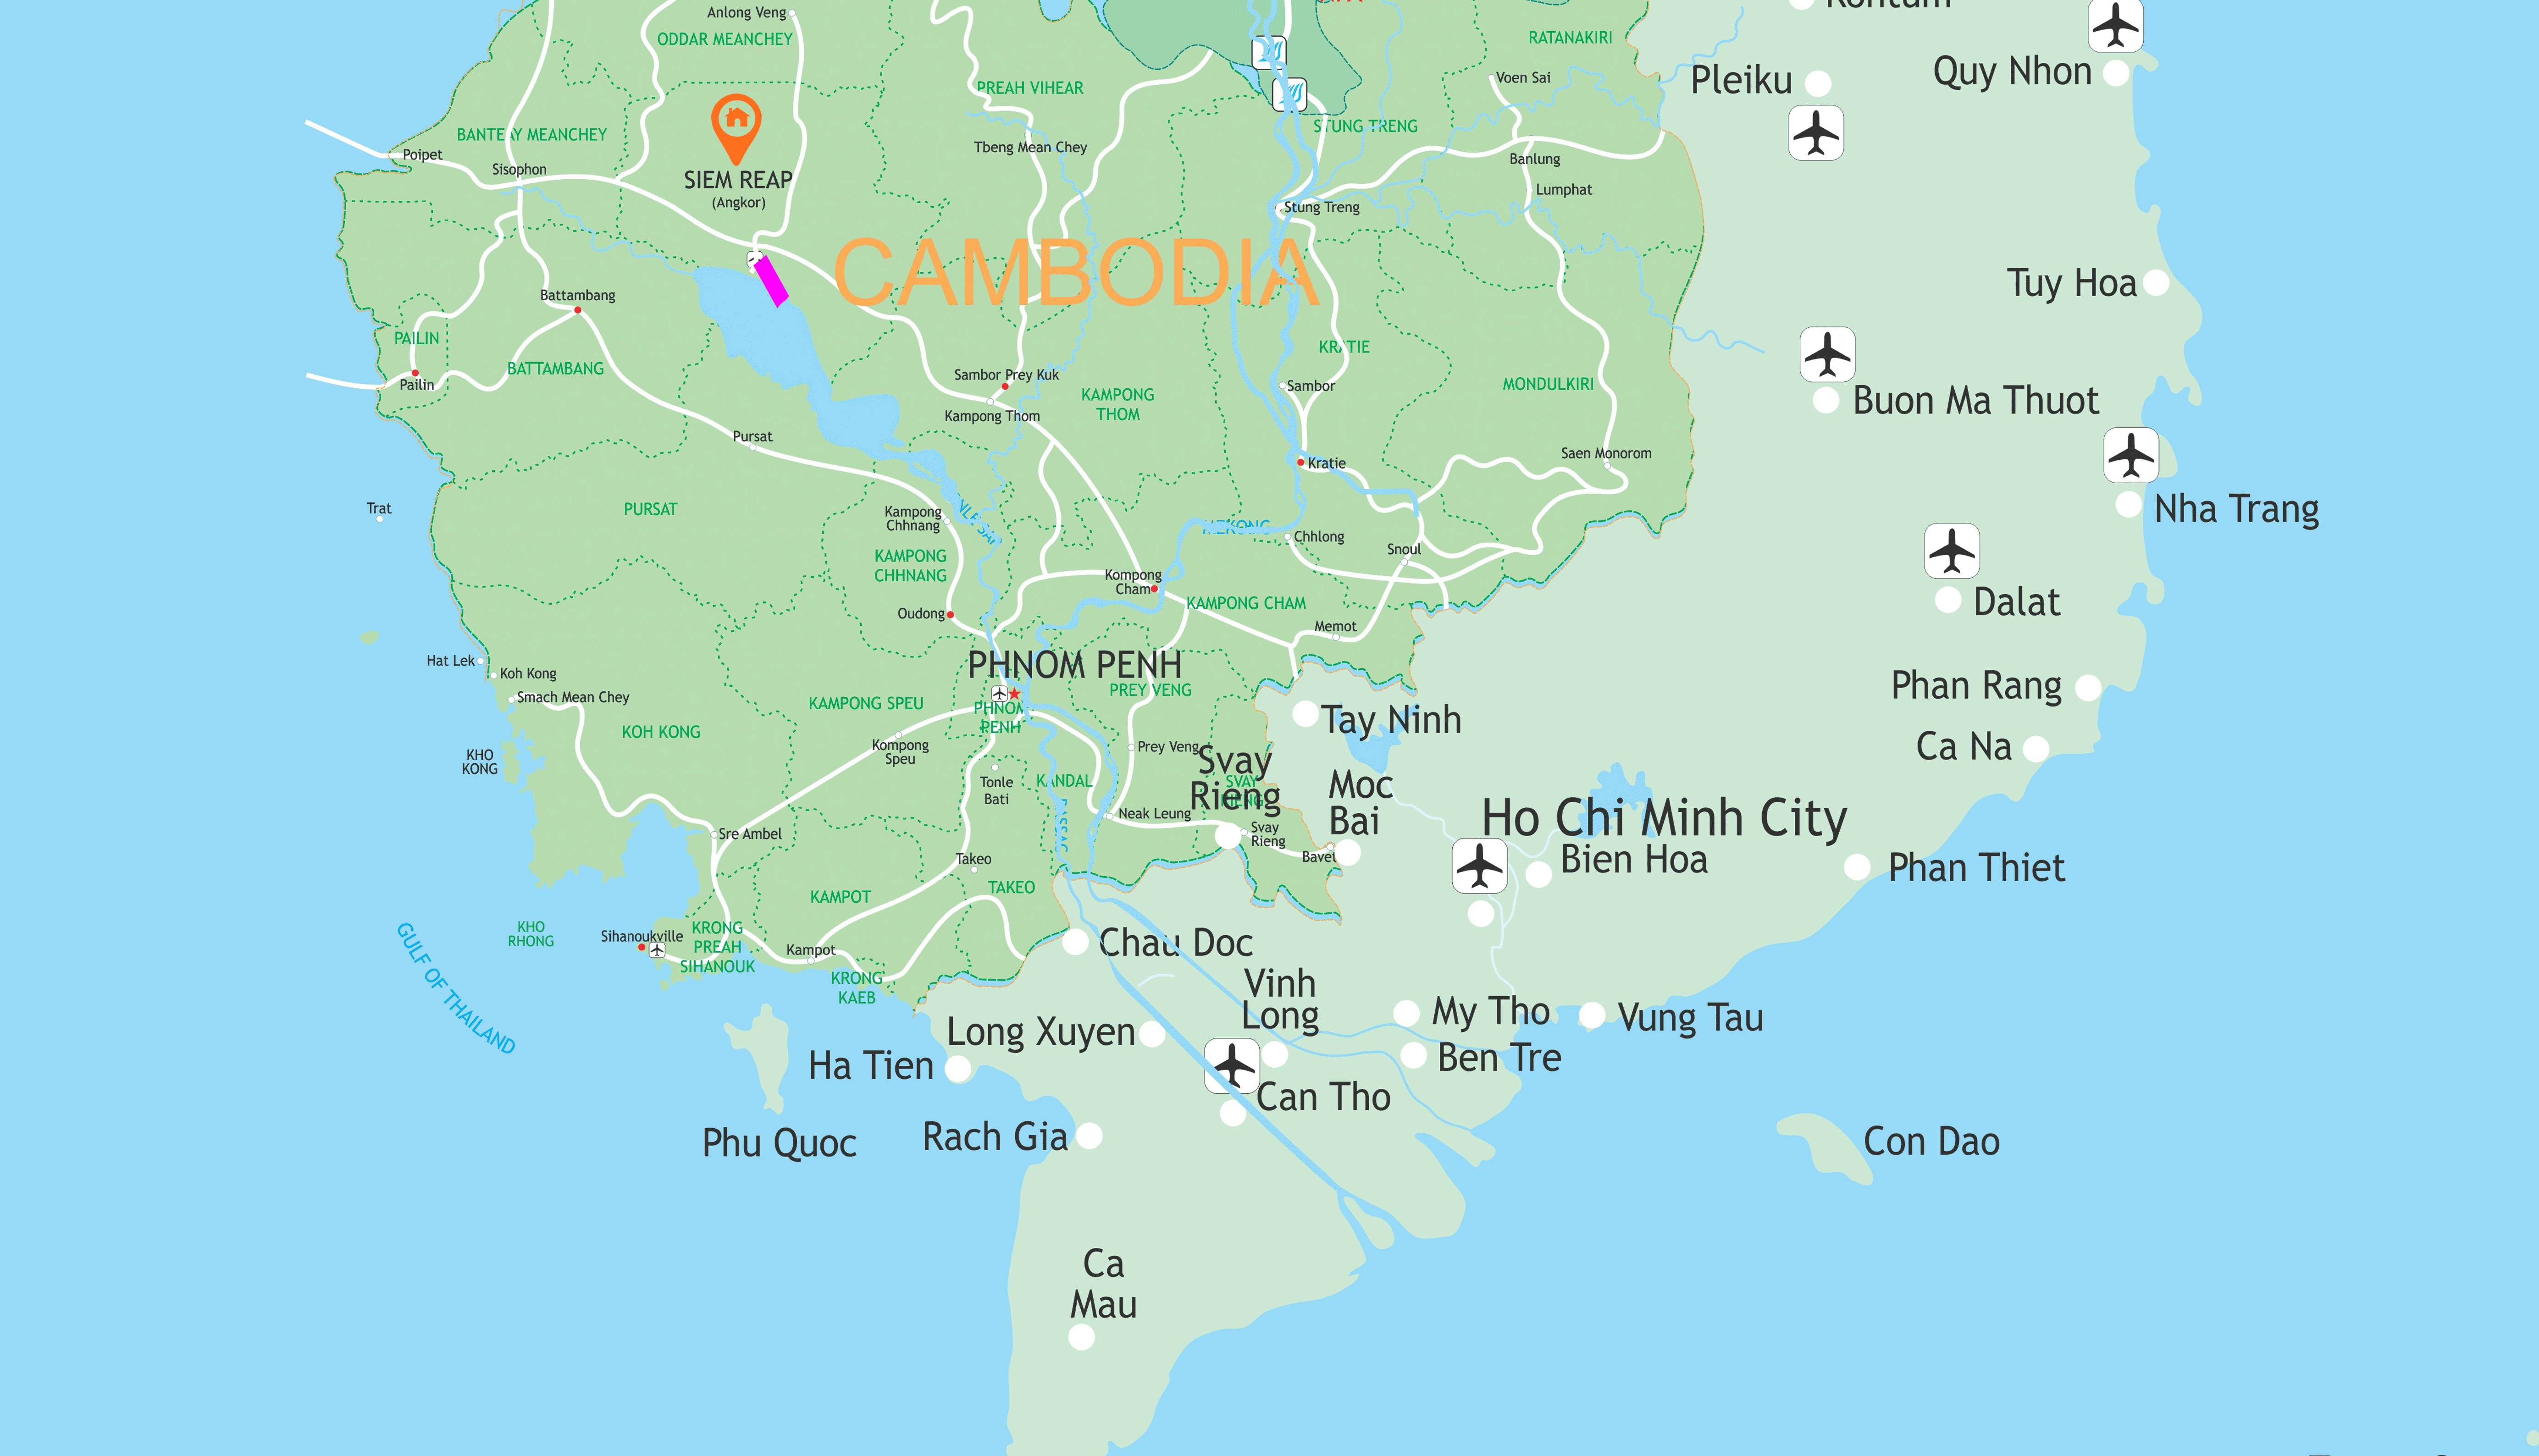 From Angkor Temples To Con Dao Island - 10 Days map